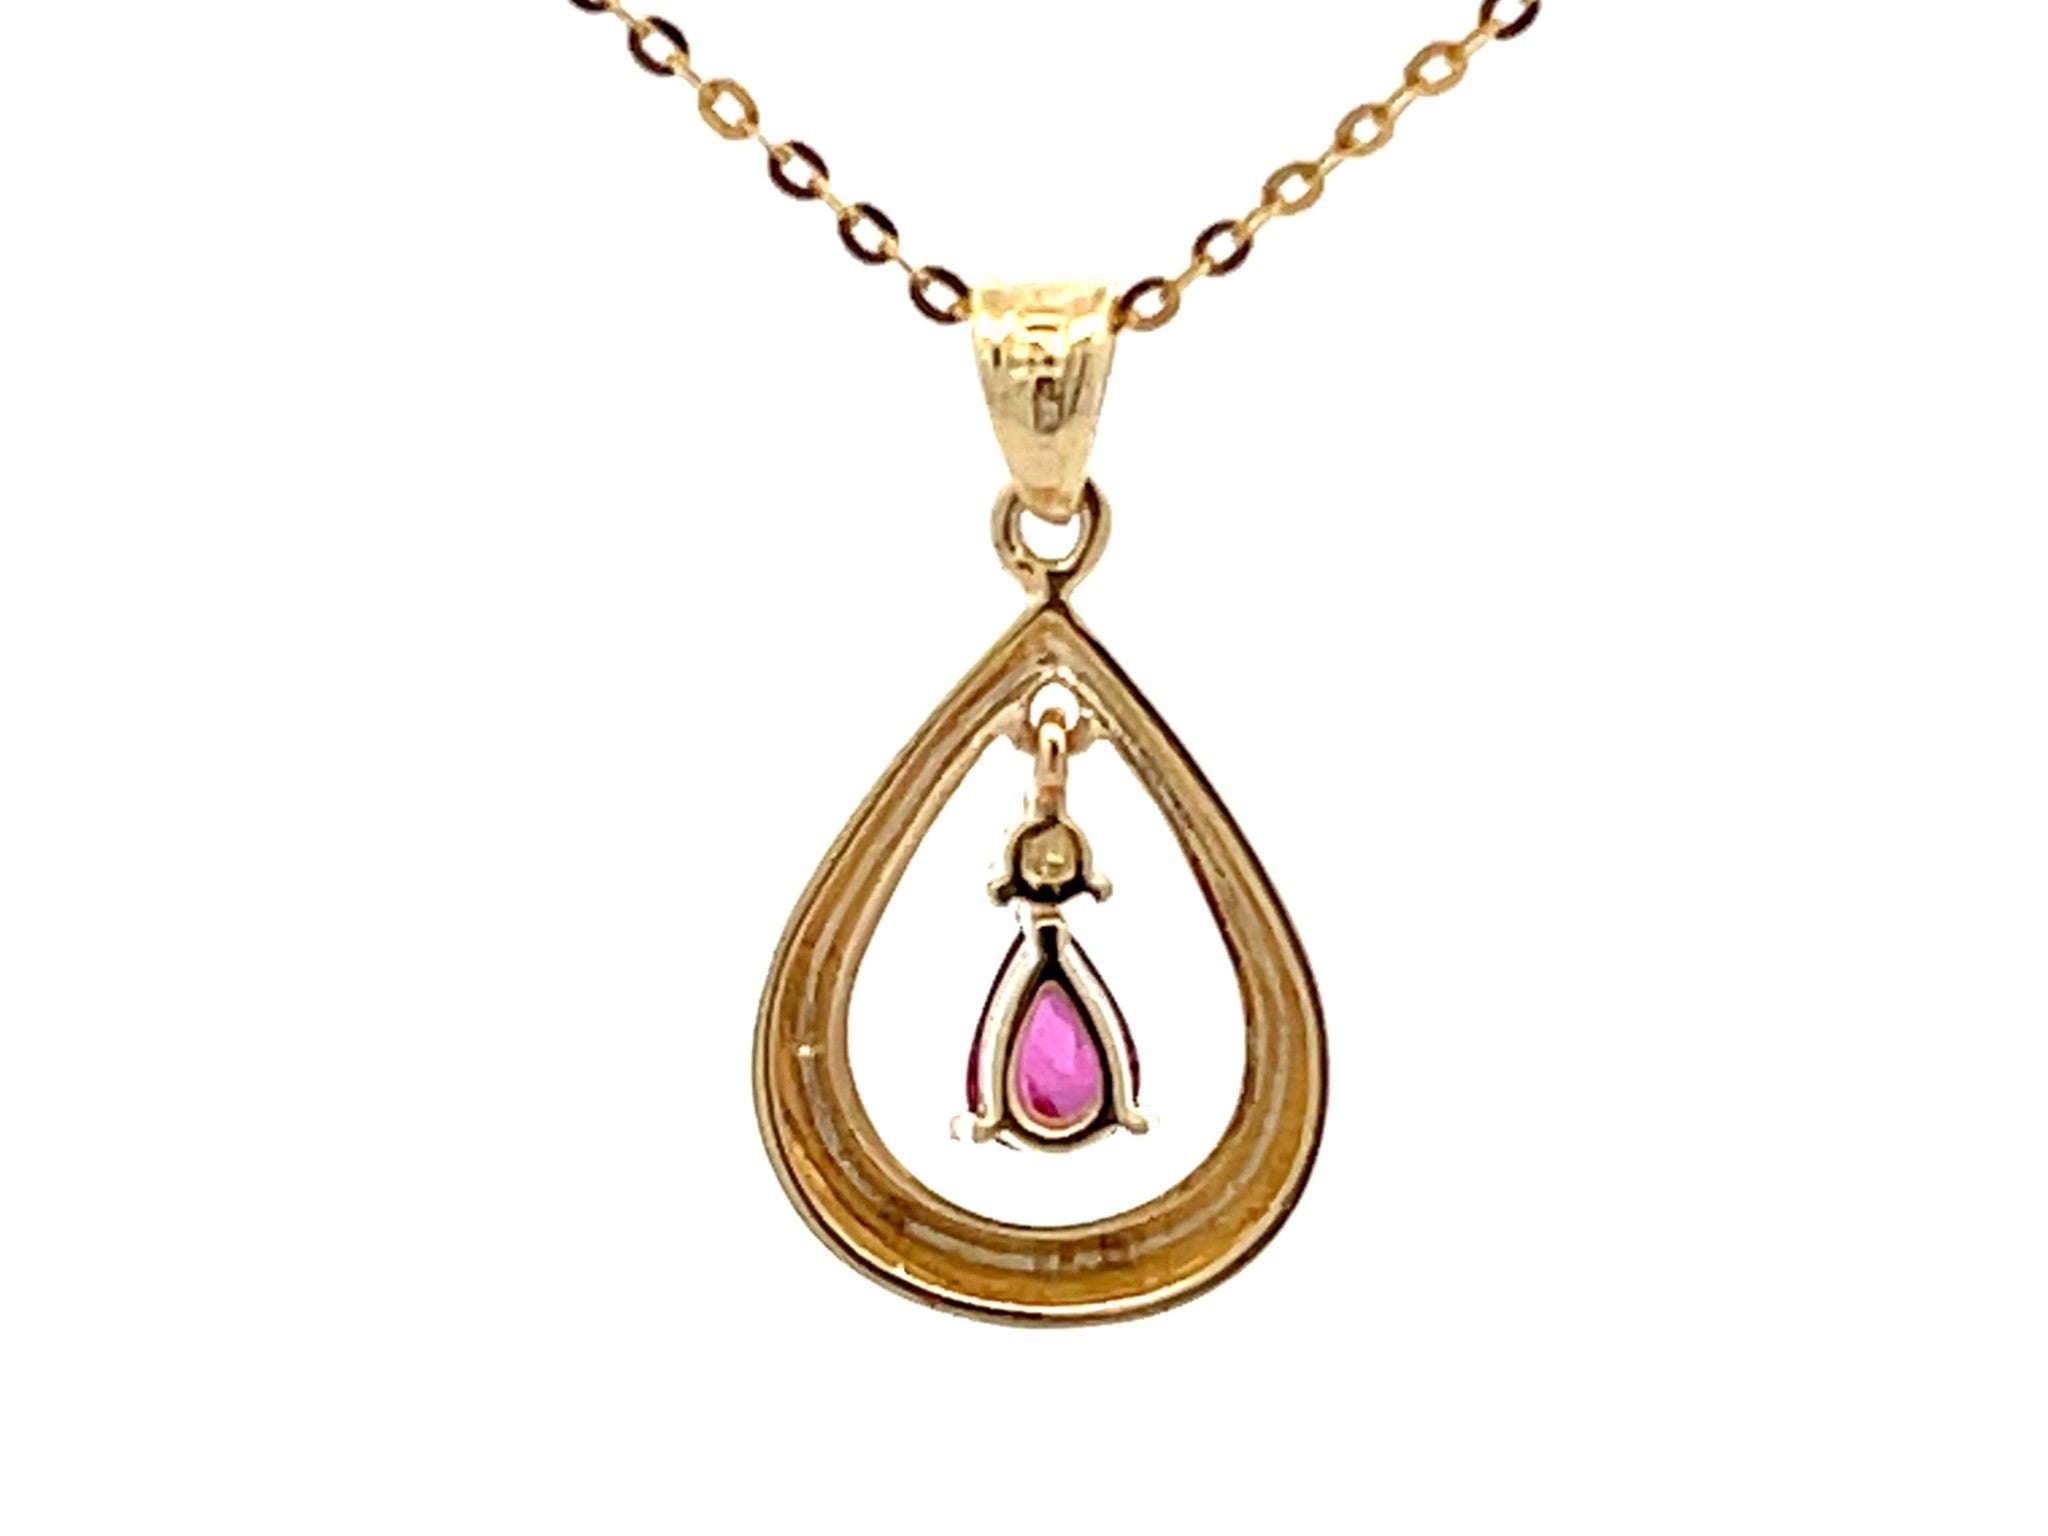 Dangly Burma Ruby Necklace 14k Yellow Gold